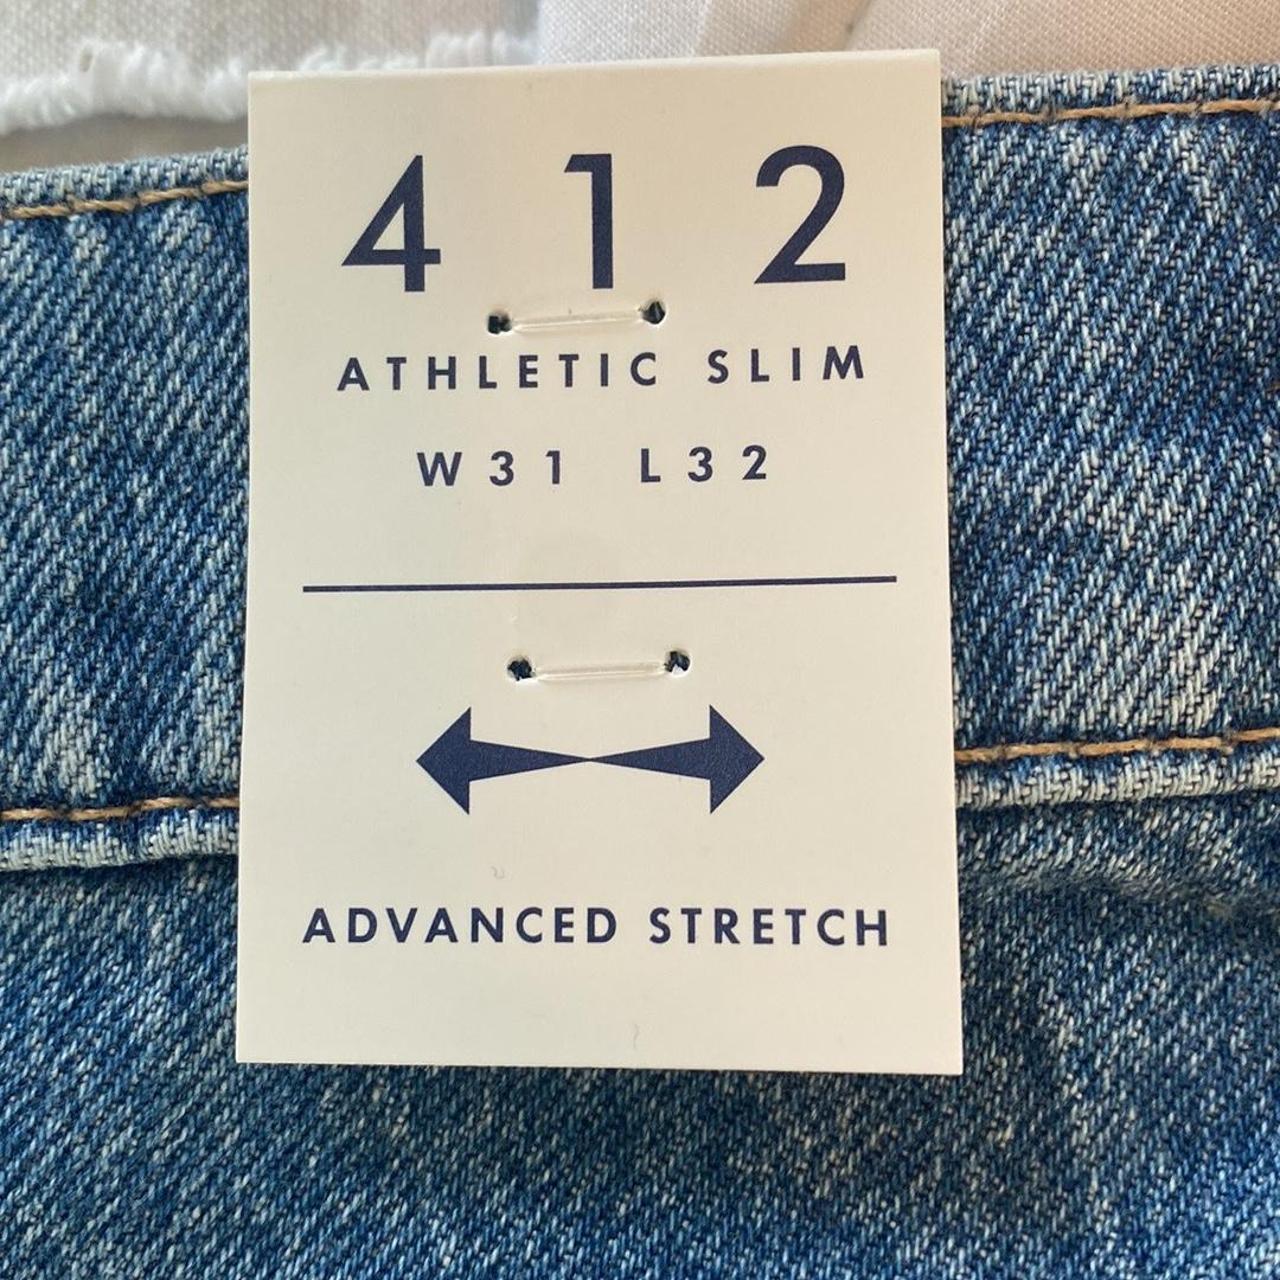 Jeans, Lucky Brand 41 Athletic Slim Jeans